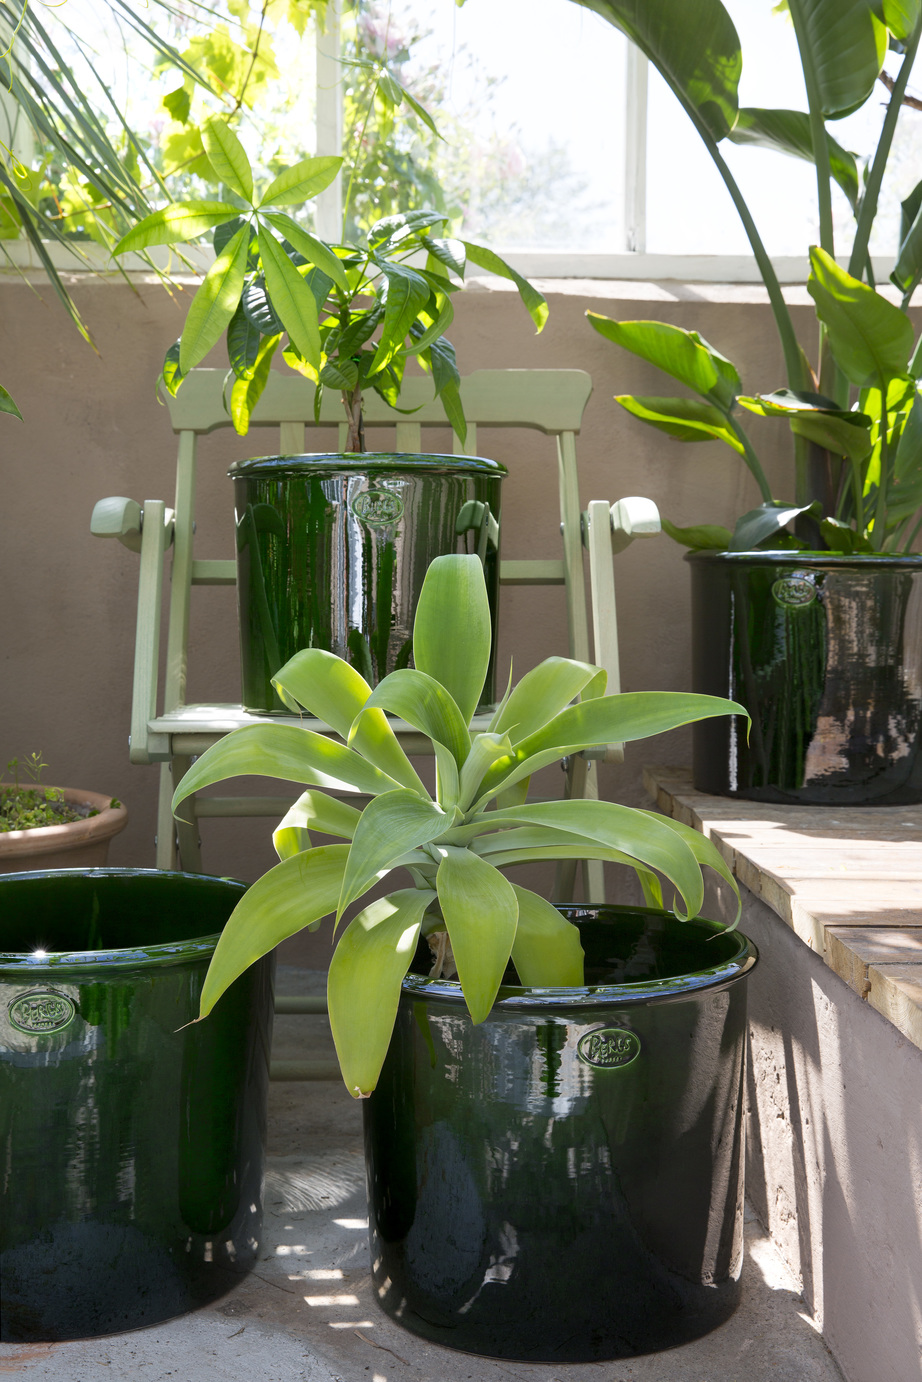 Collection of green glazed cover pots with plants